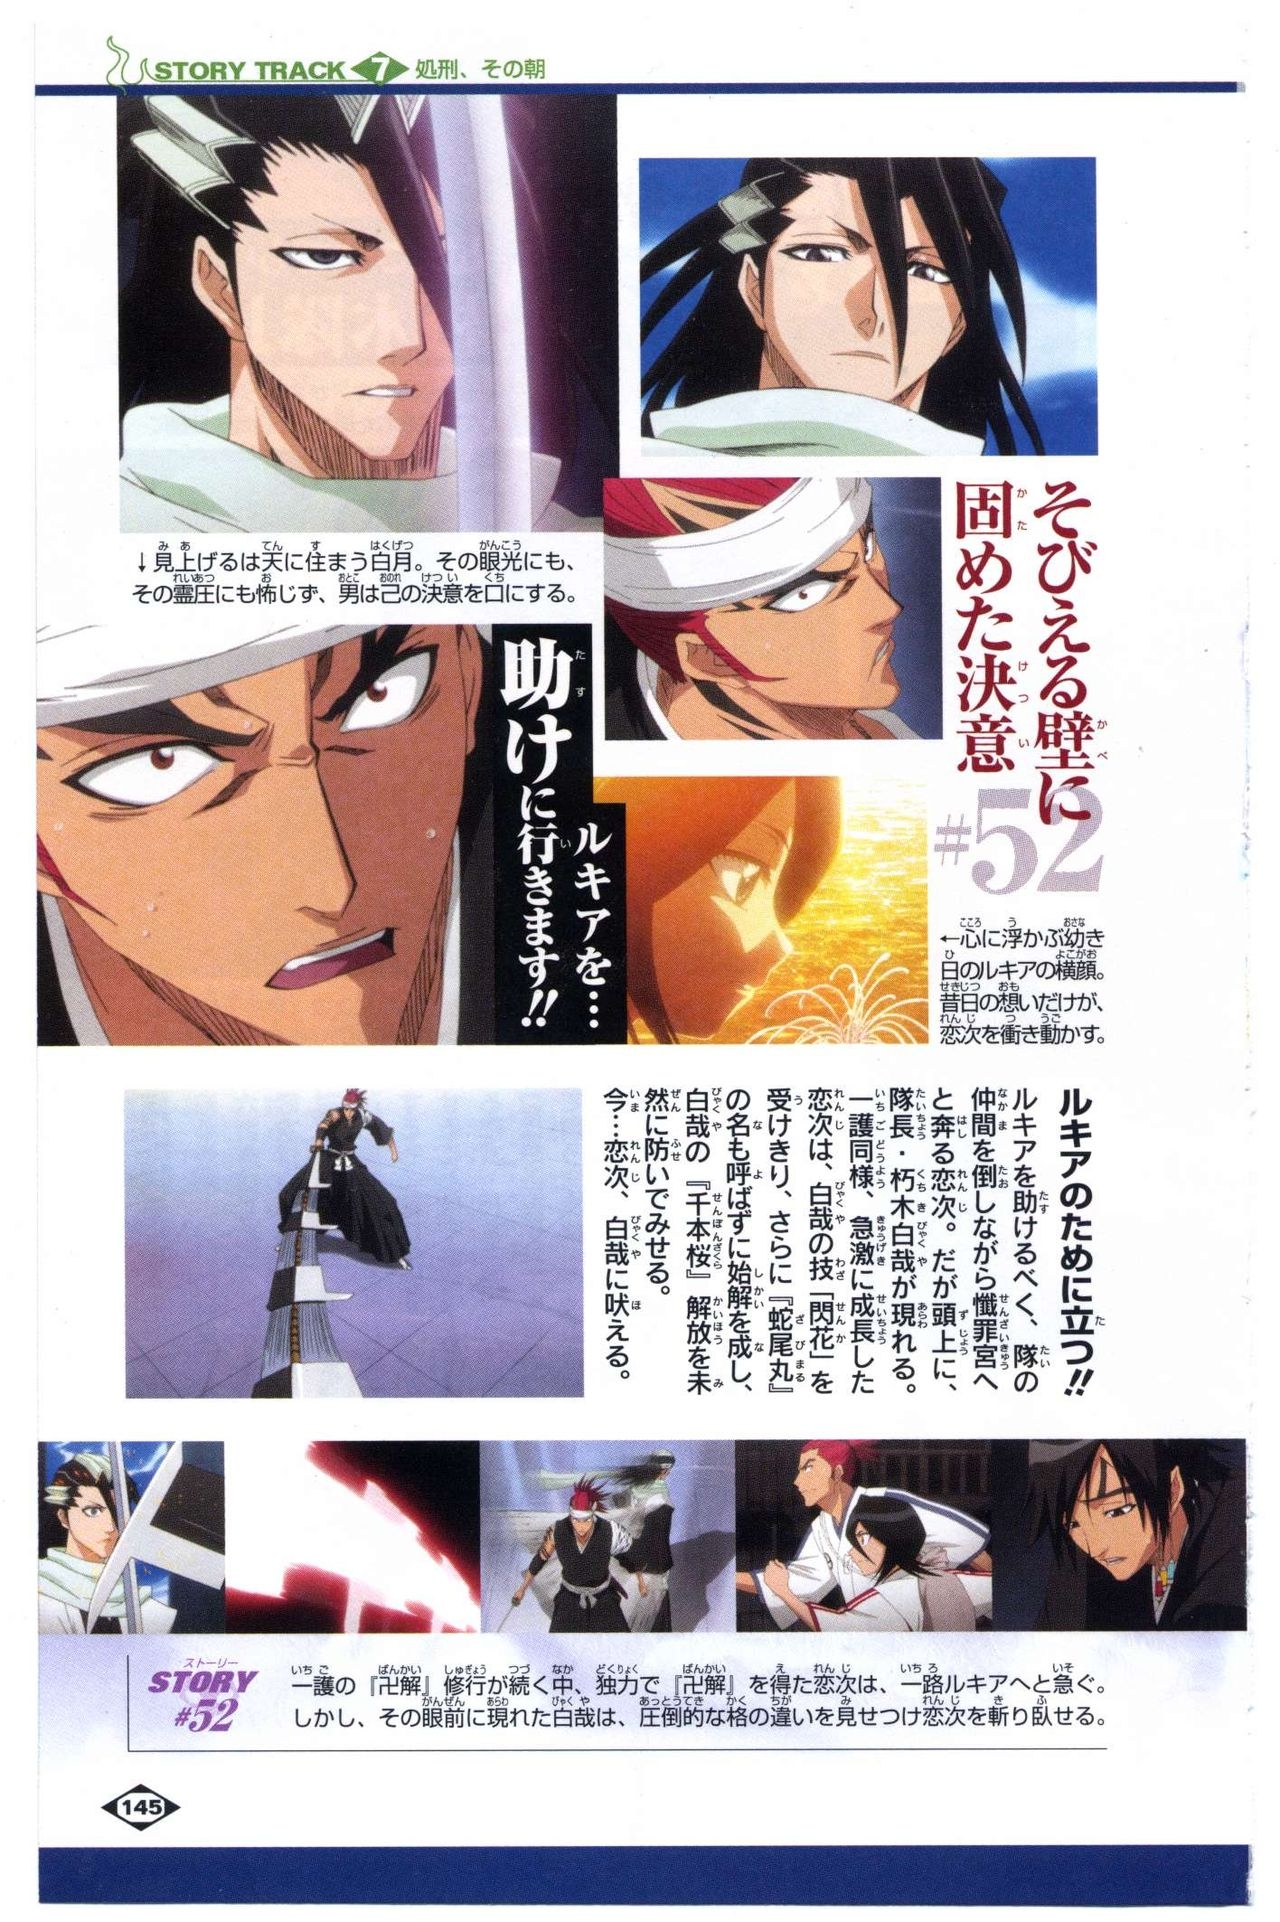 Bleach: Official Animation Book VIBEs 145